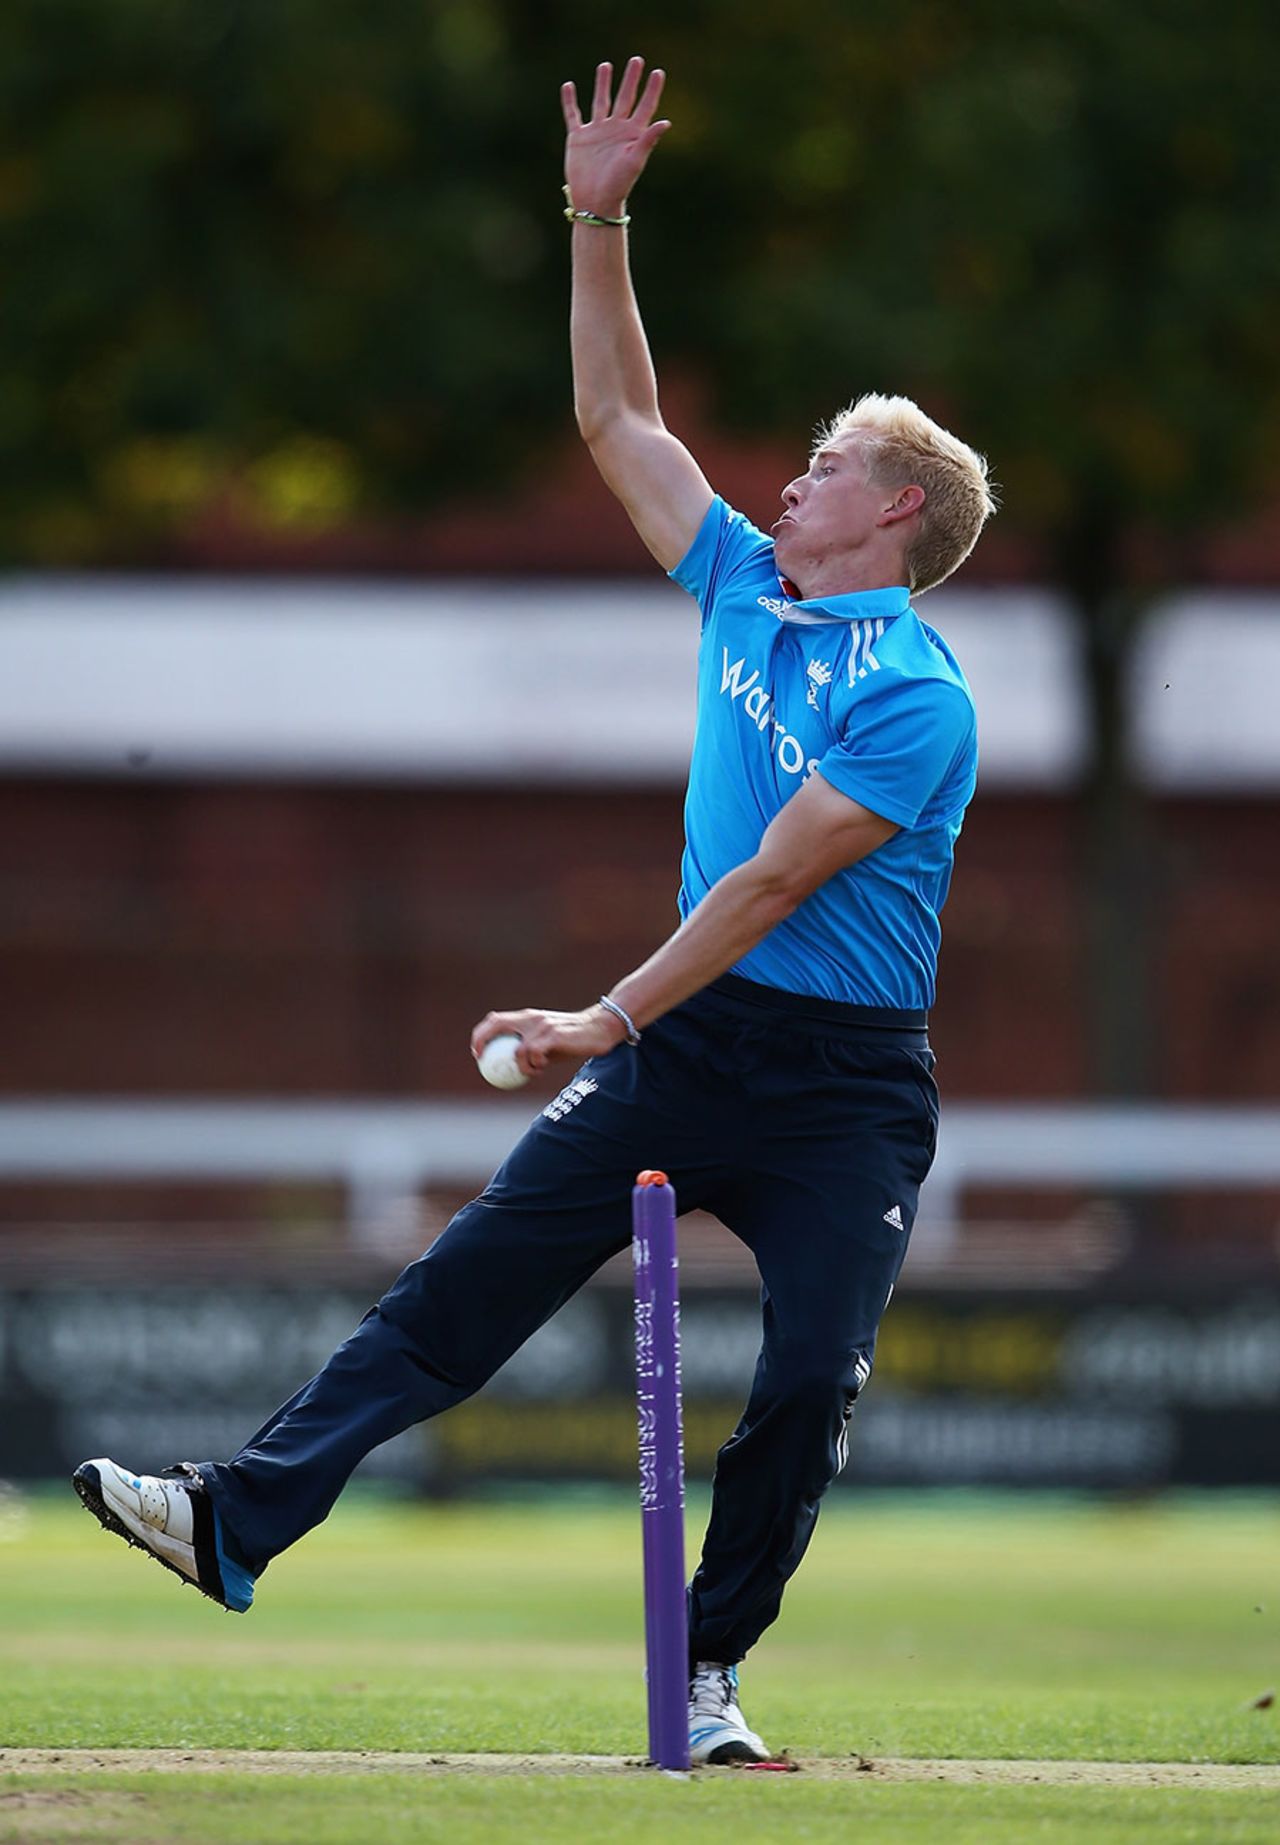 Luke Wood took 4 for 16, England Under-19s v South Africa Under-19s, 4th Youth ODI, Grace Road, August 20, 2014